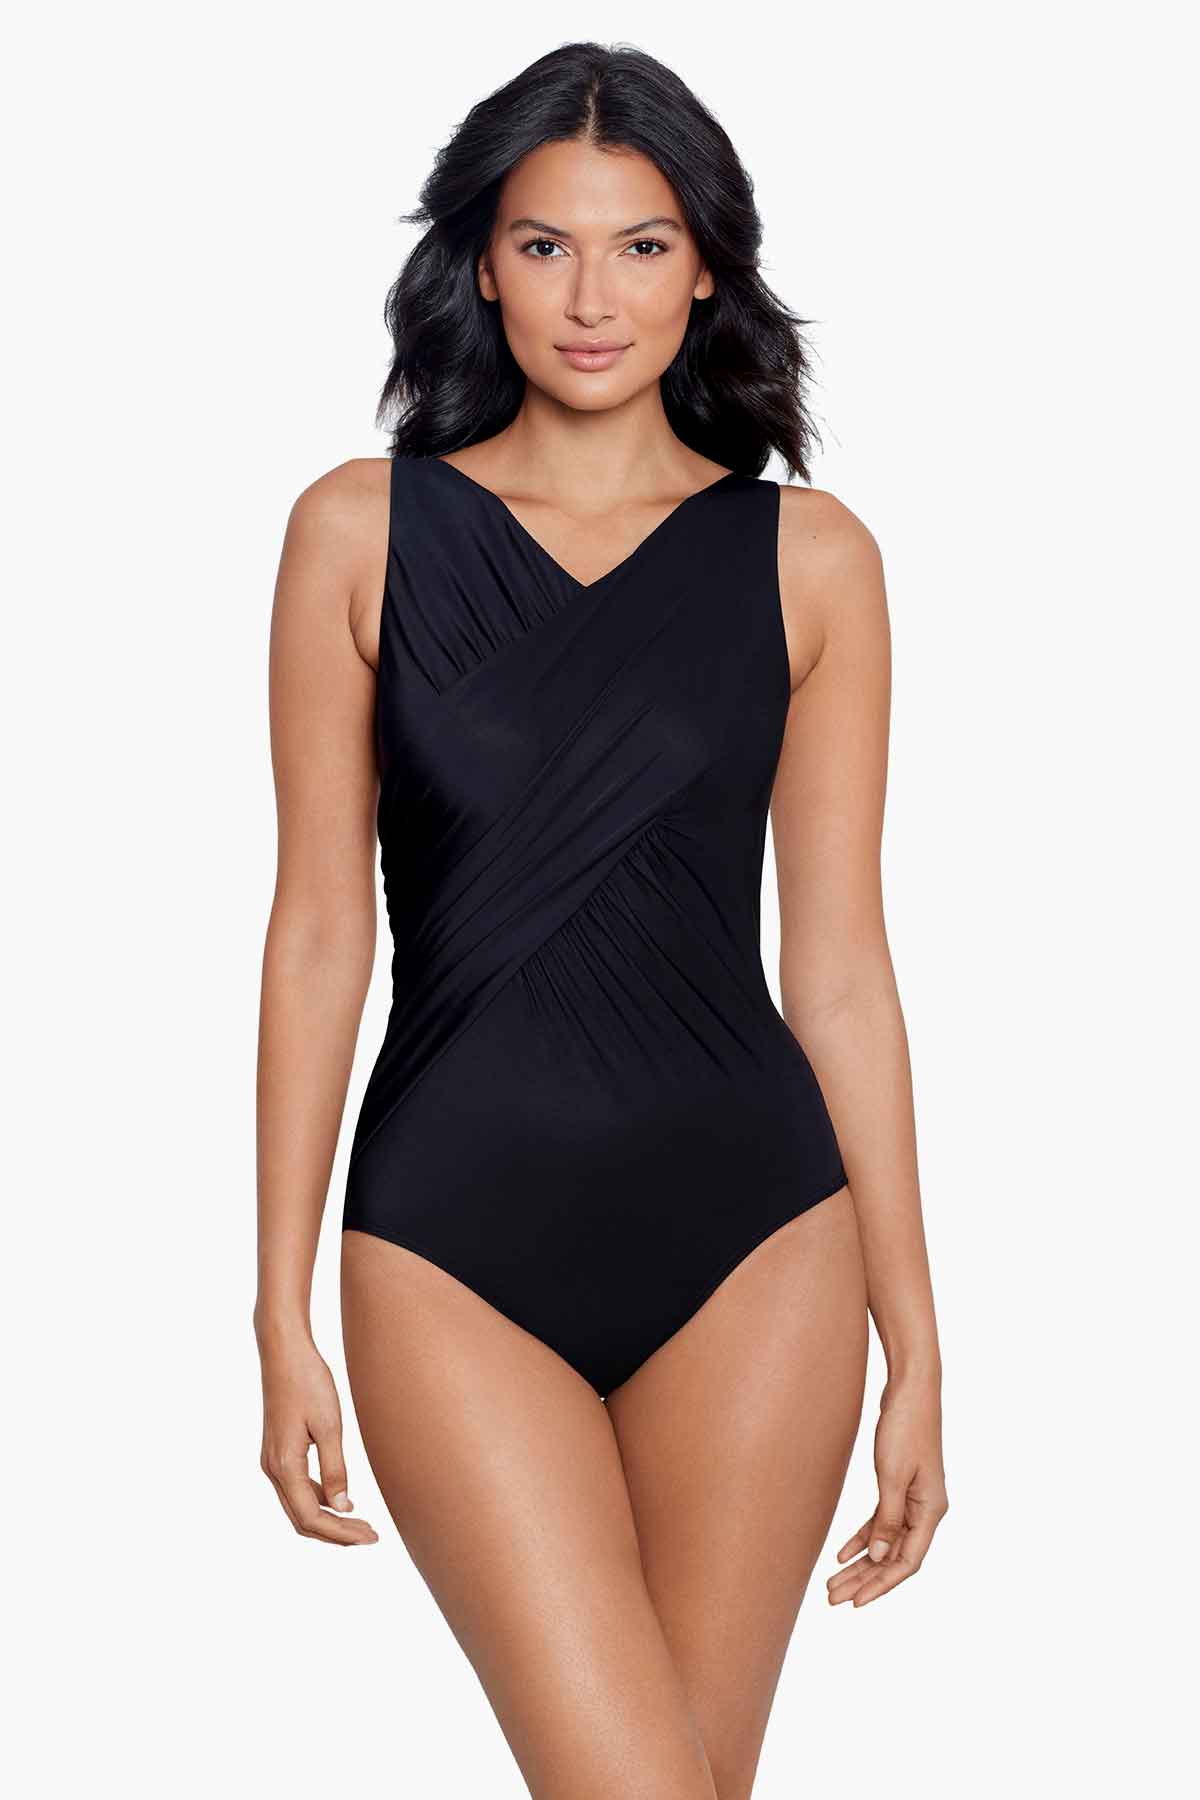 Miracle Suit Swim  Studio Lingerie Miraclesuit .. loose 10lbs in 10  seconds ..